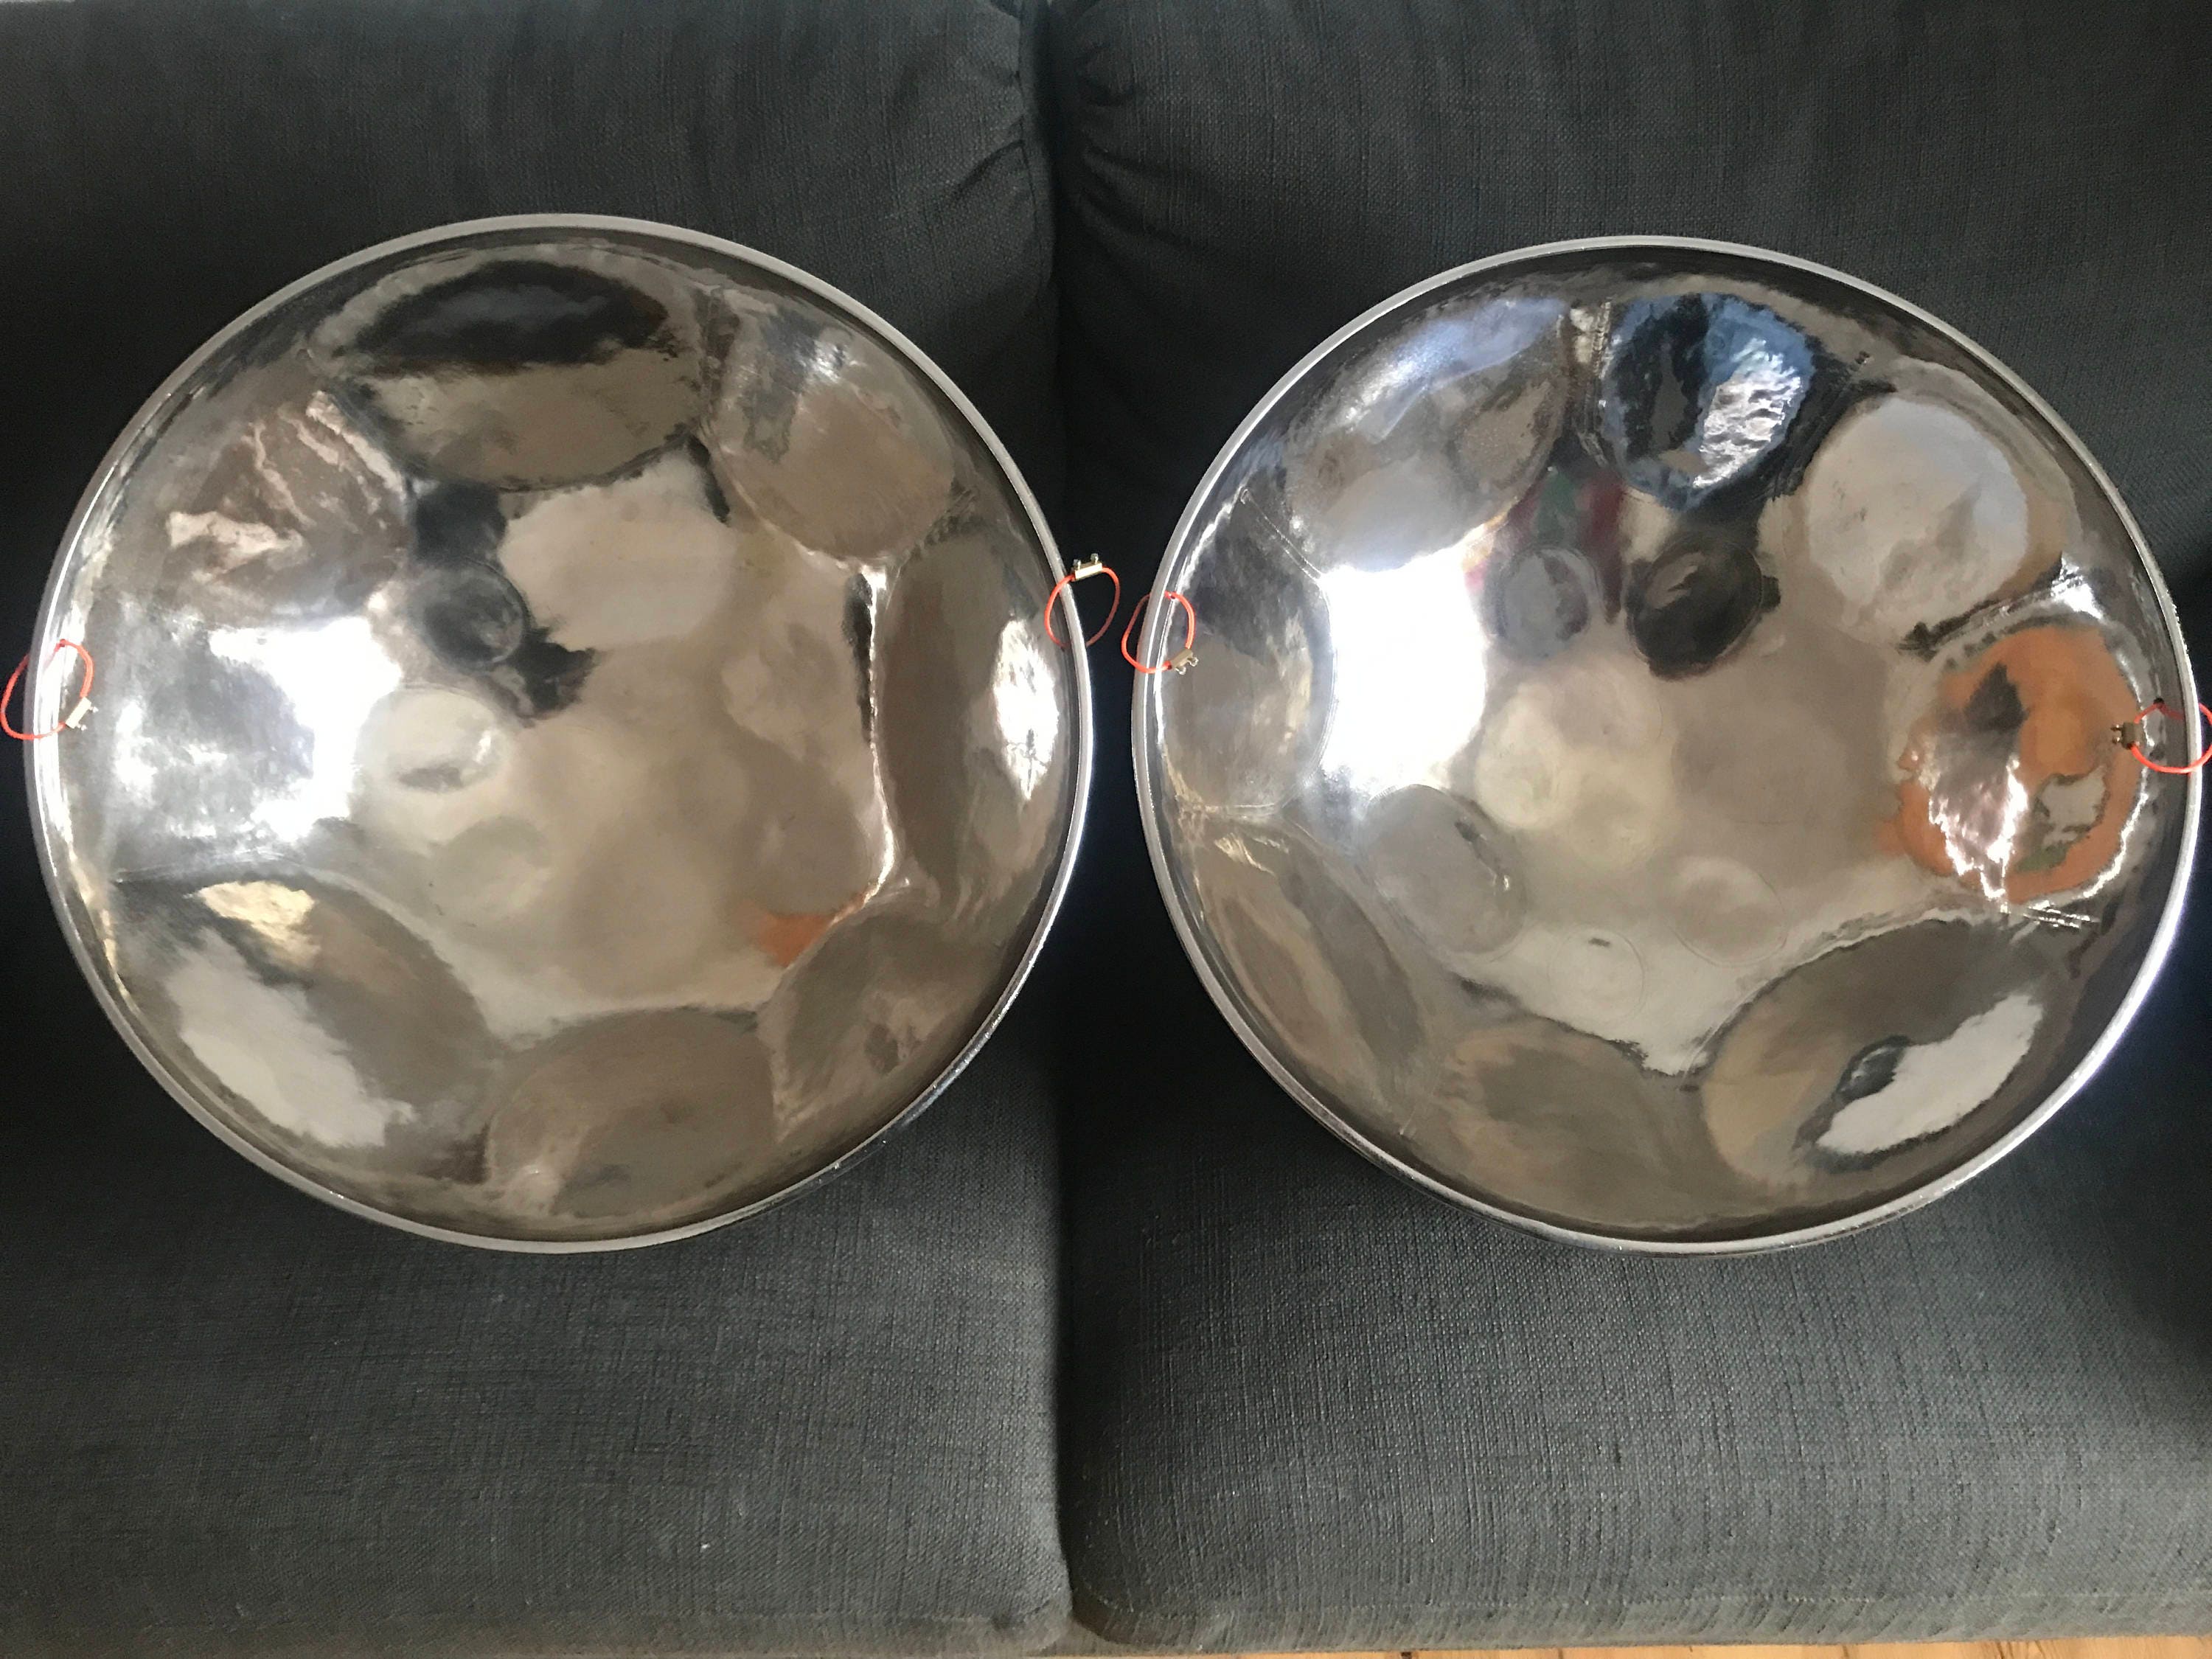 Fancy Pans Chromatic Double Set - A Very cool set of steel drums - #16DM -  USED